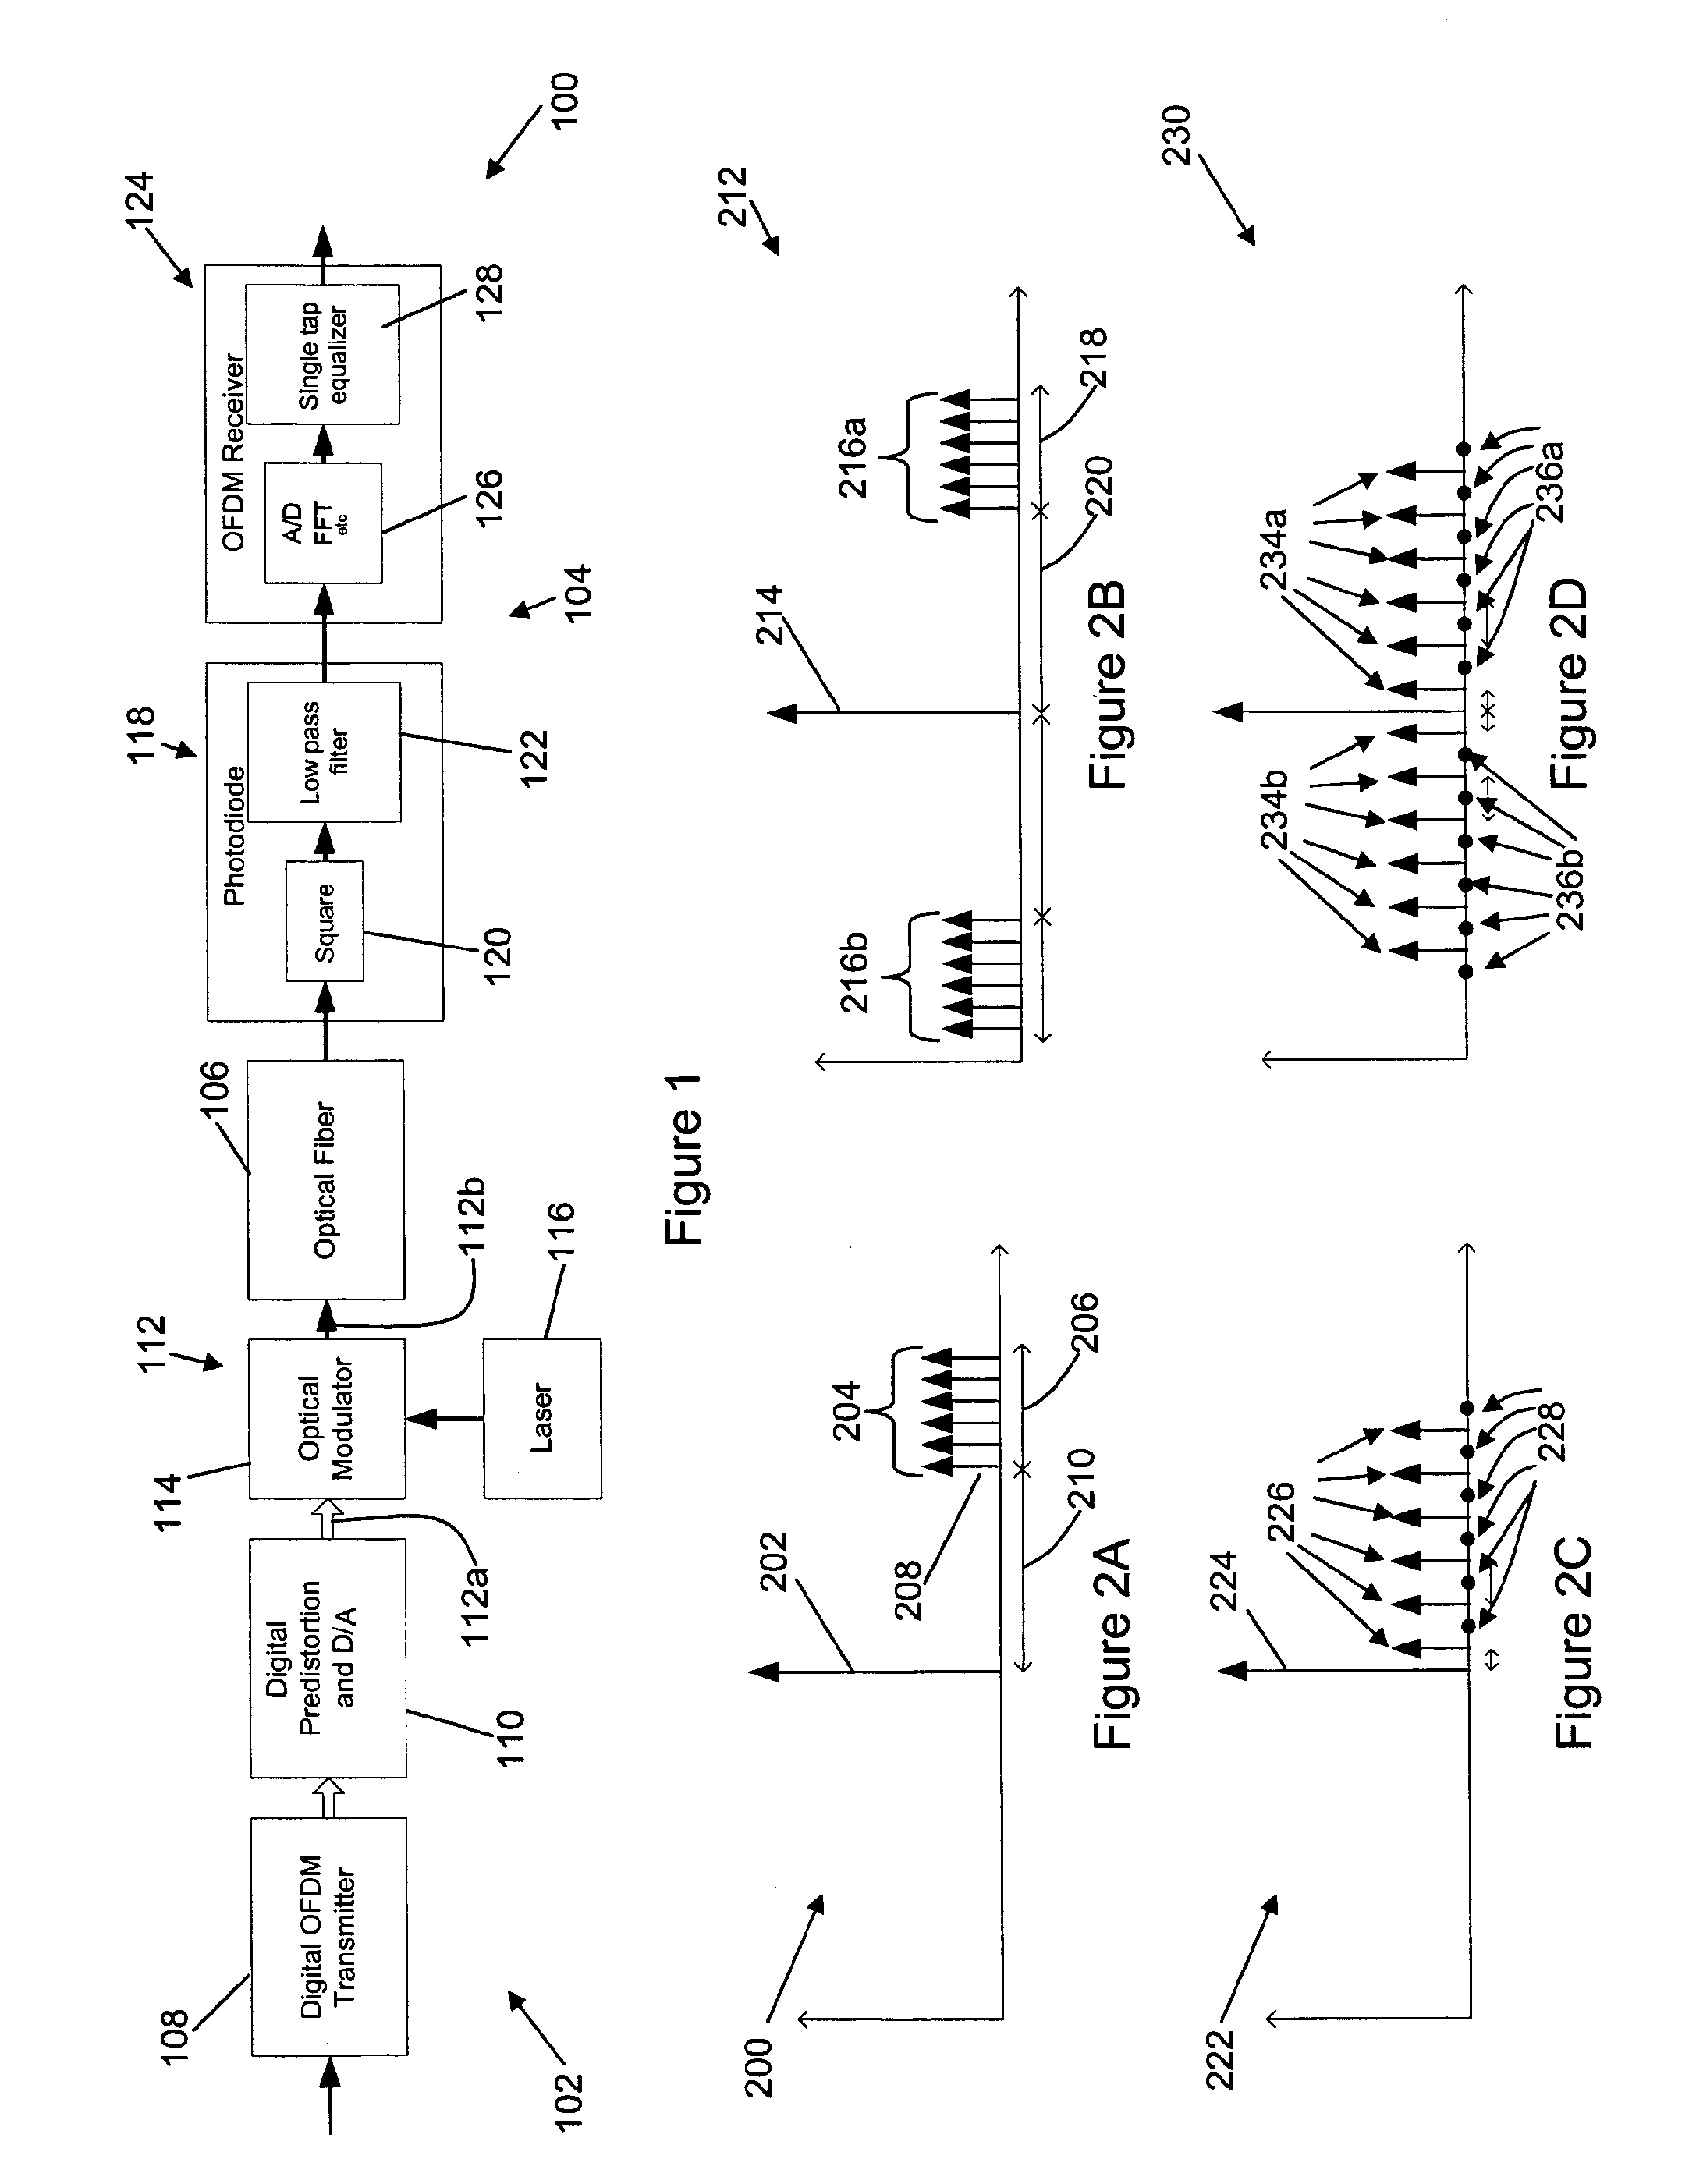 Methods and apparatus for generation and transmission of optical signals